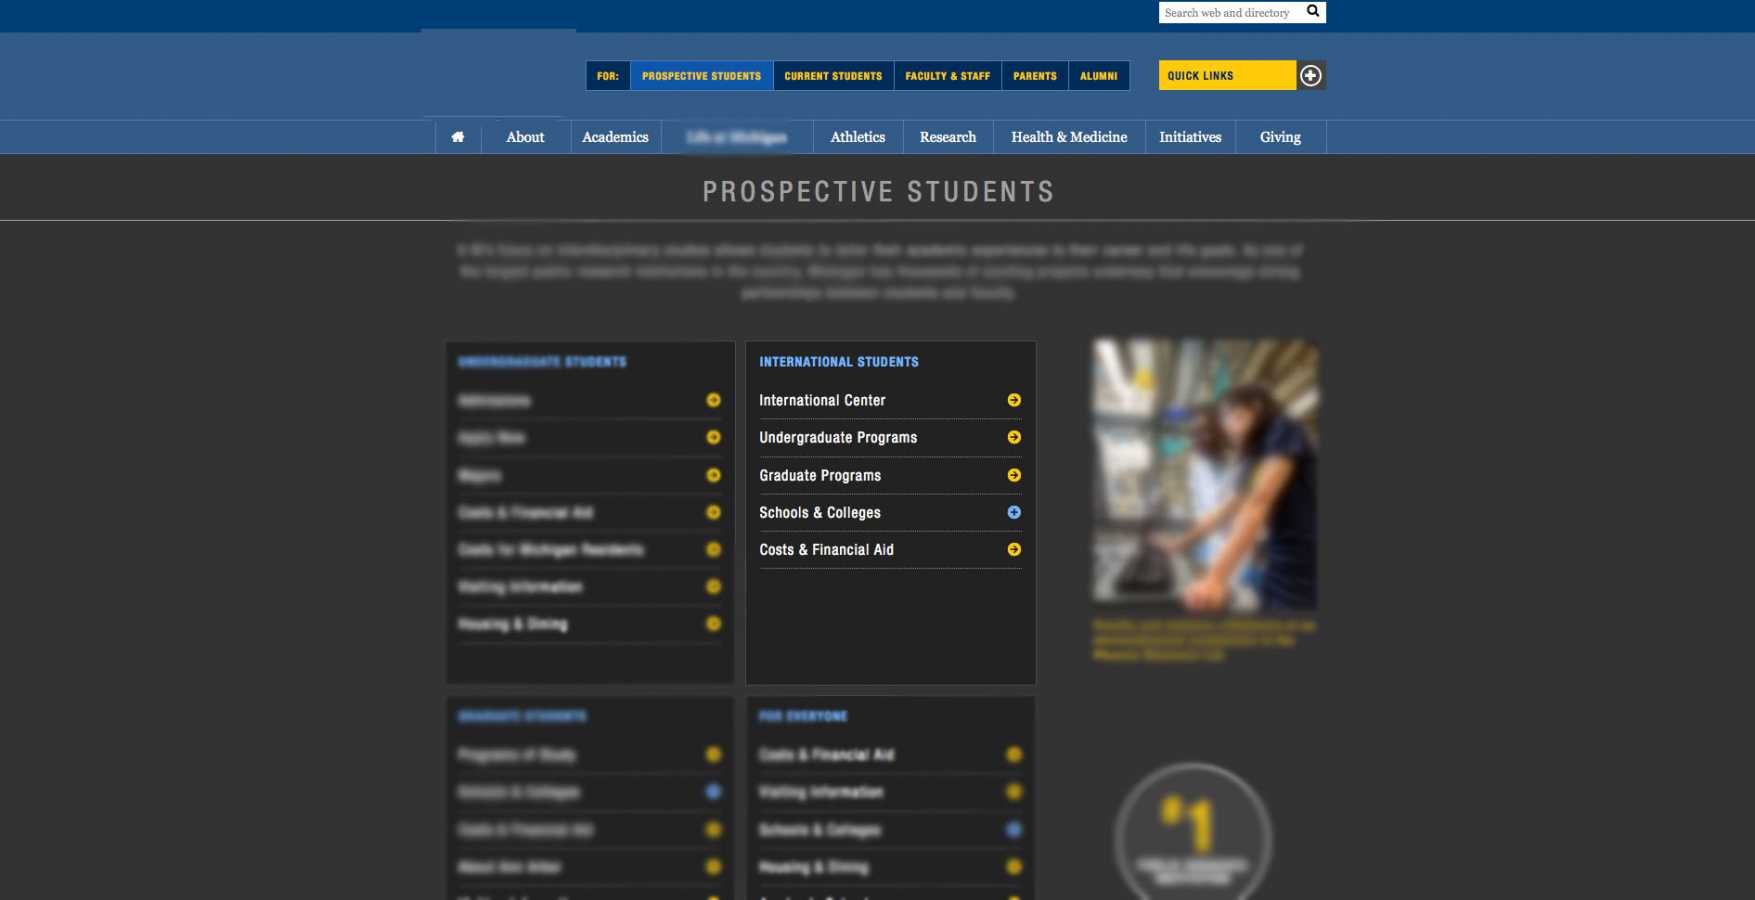 Revamp Your University Website and Marketing to Target International Students